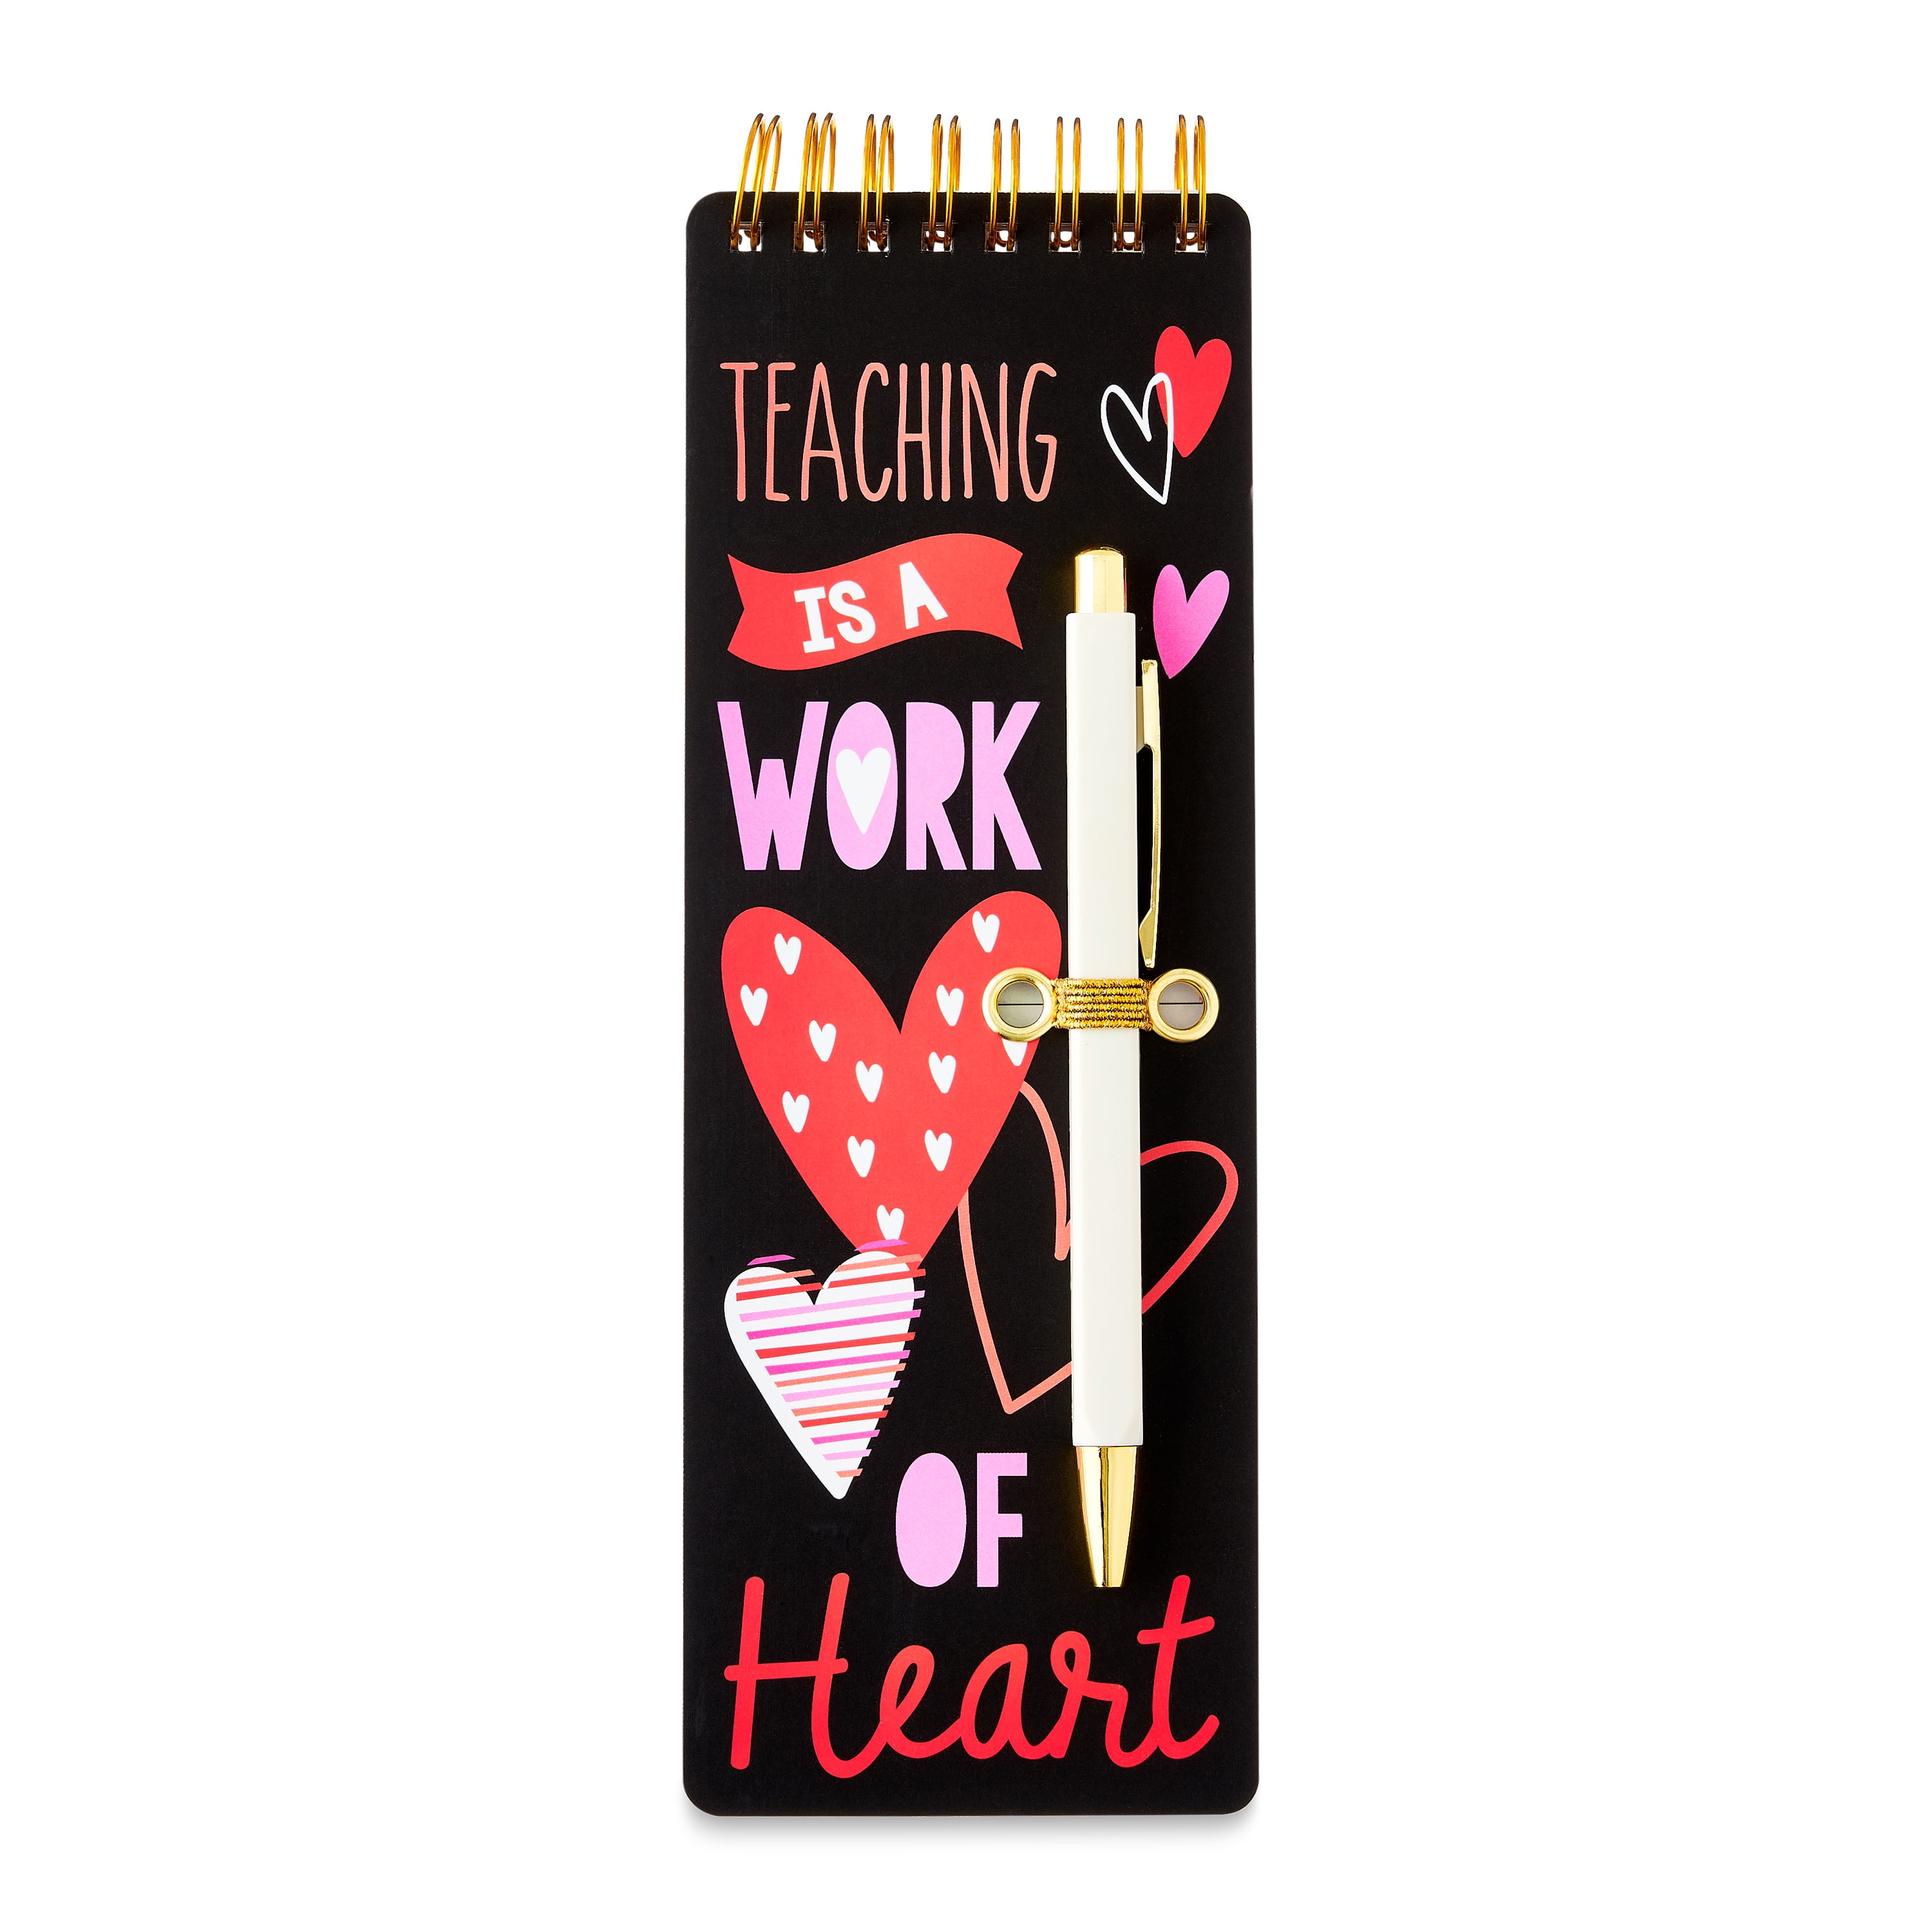 WAY TO CELEBRATE! Way To Celebrate Work of Heart Notebook with Pen